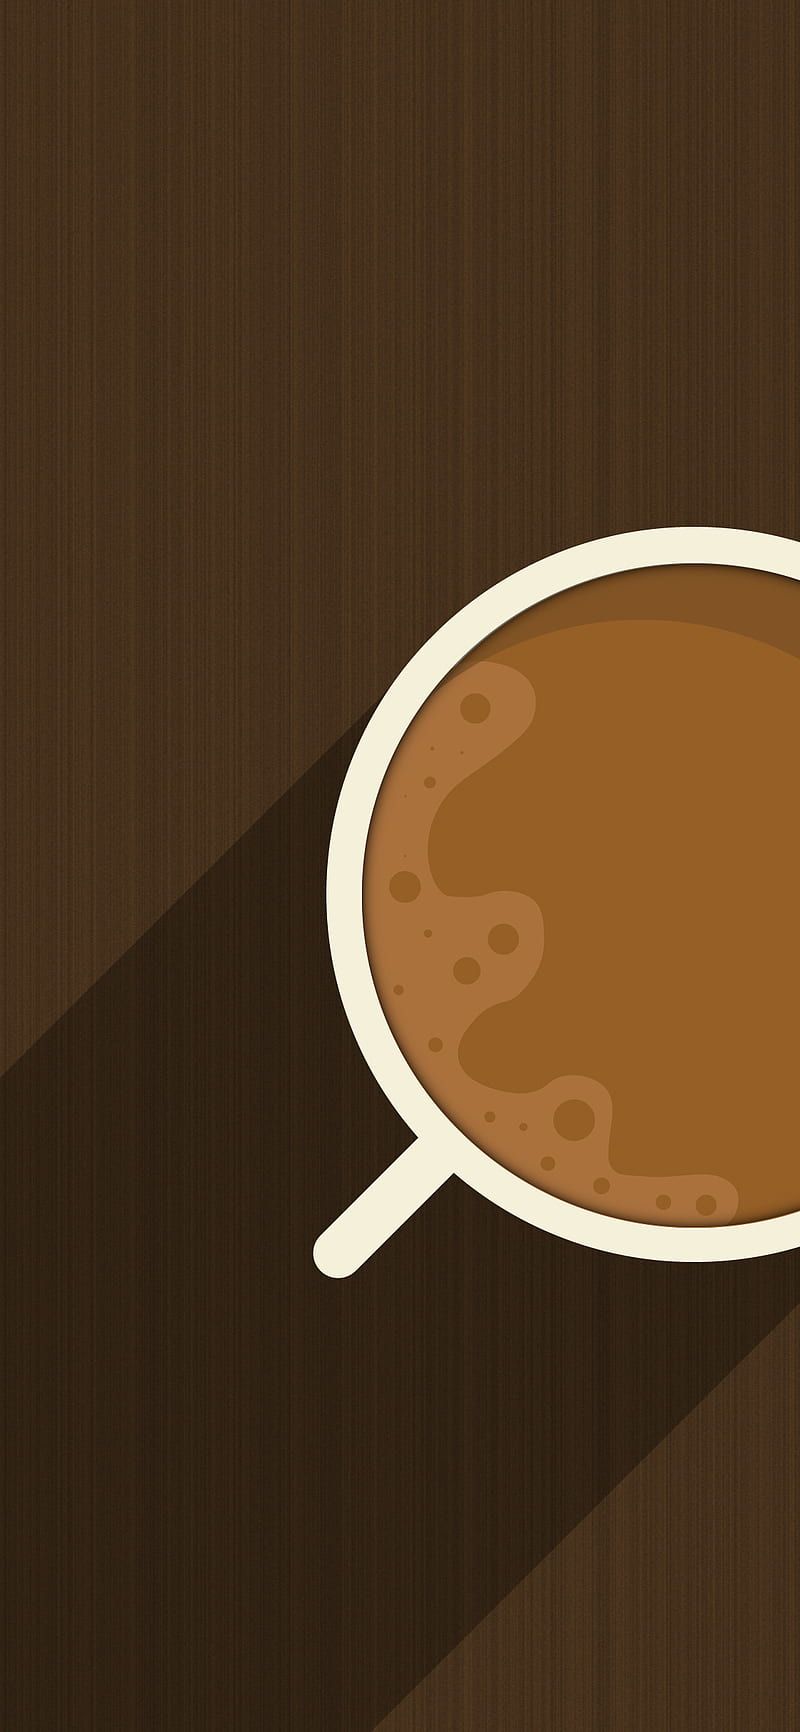 A cup of coffee on top is shown - Coffee